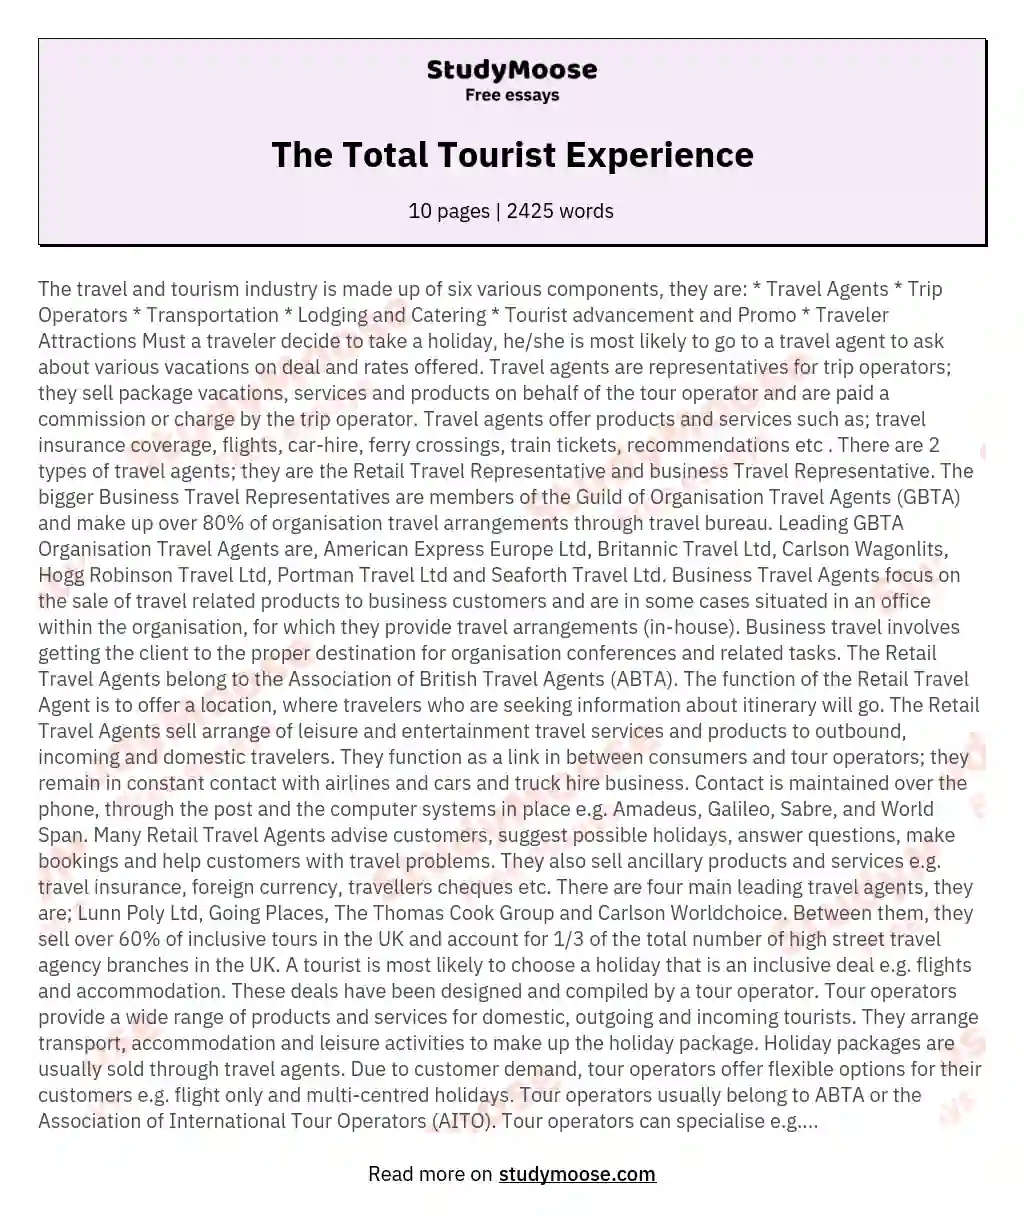 The Total Tourist Experience essay